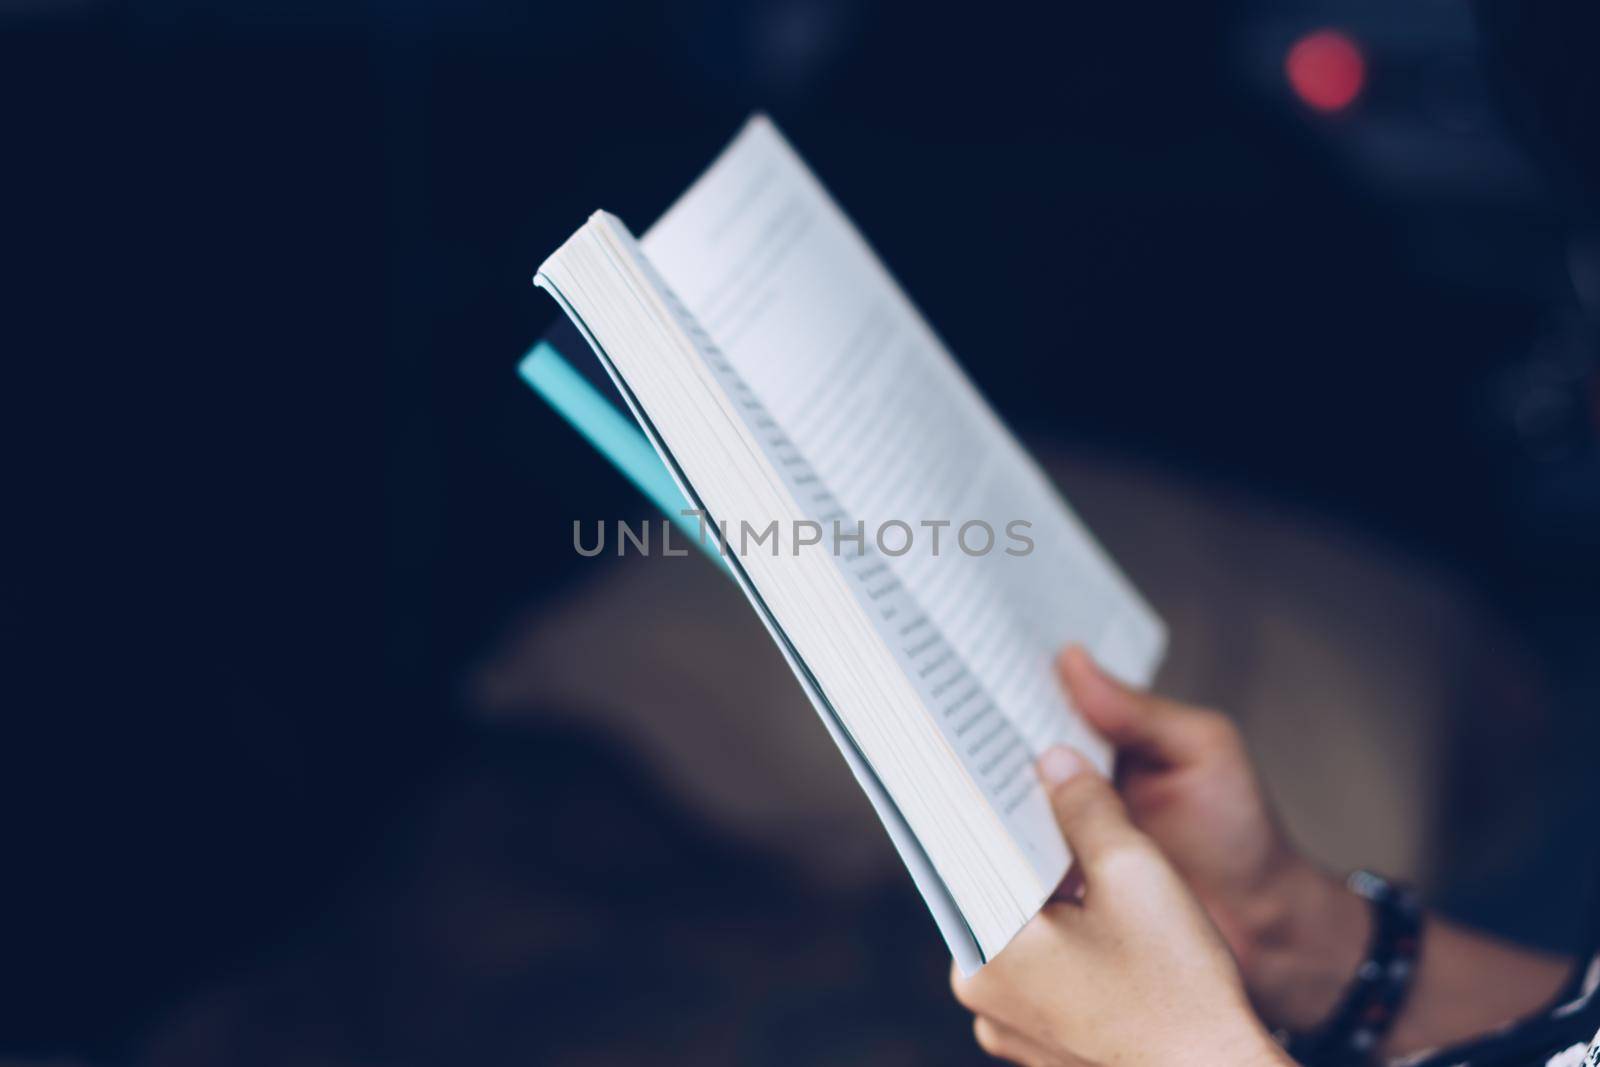 A person is reading book in car feel relax and peaceful environment background.